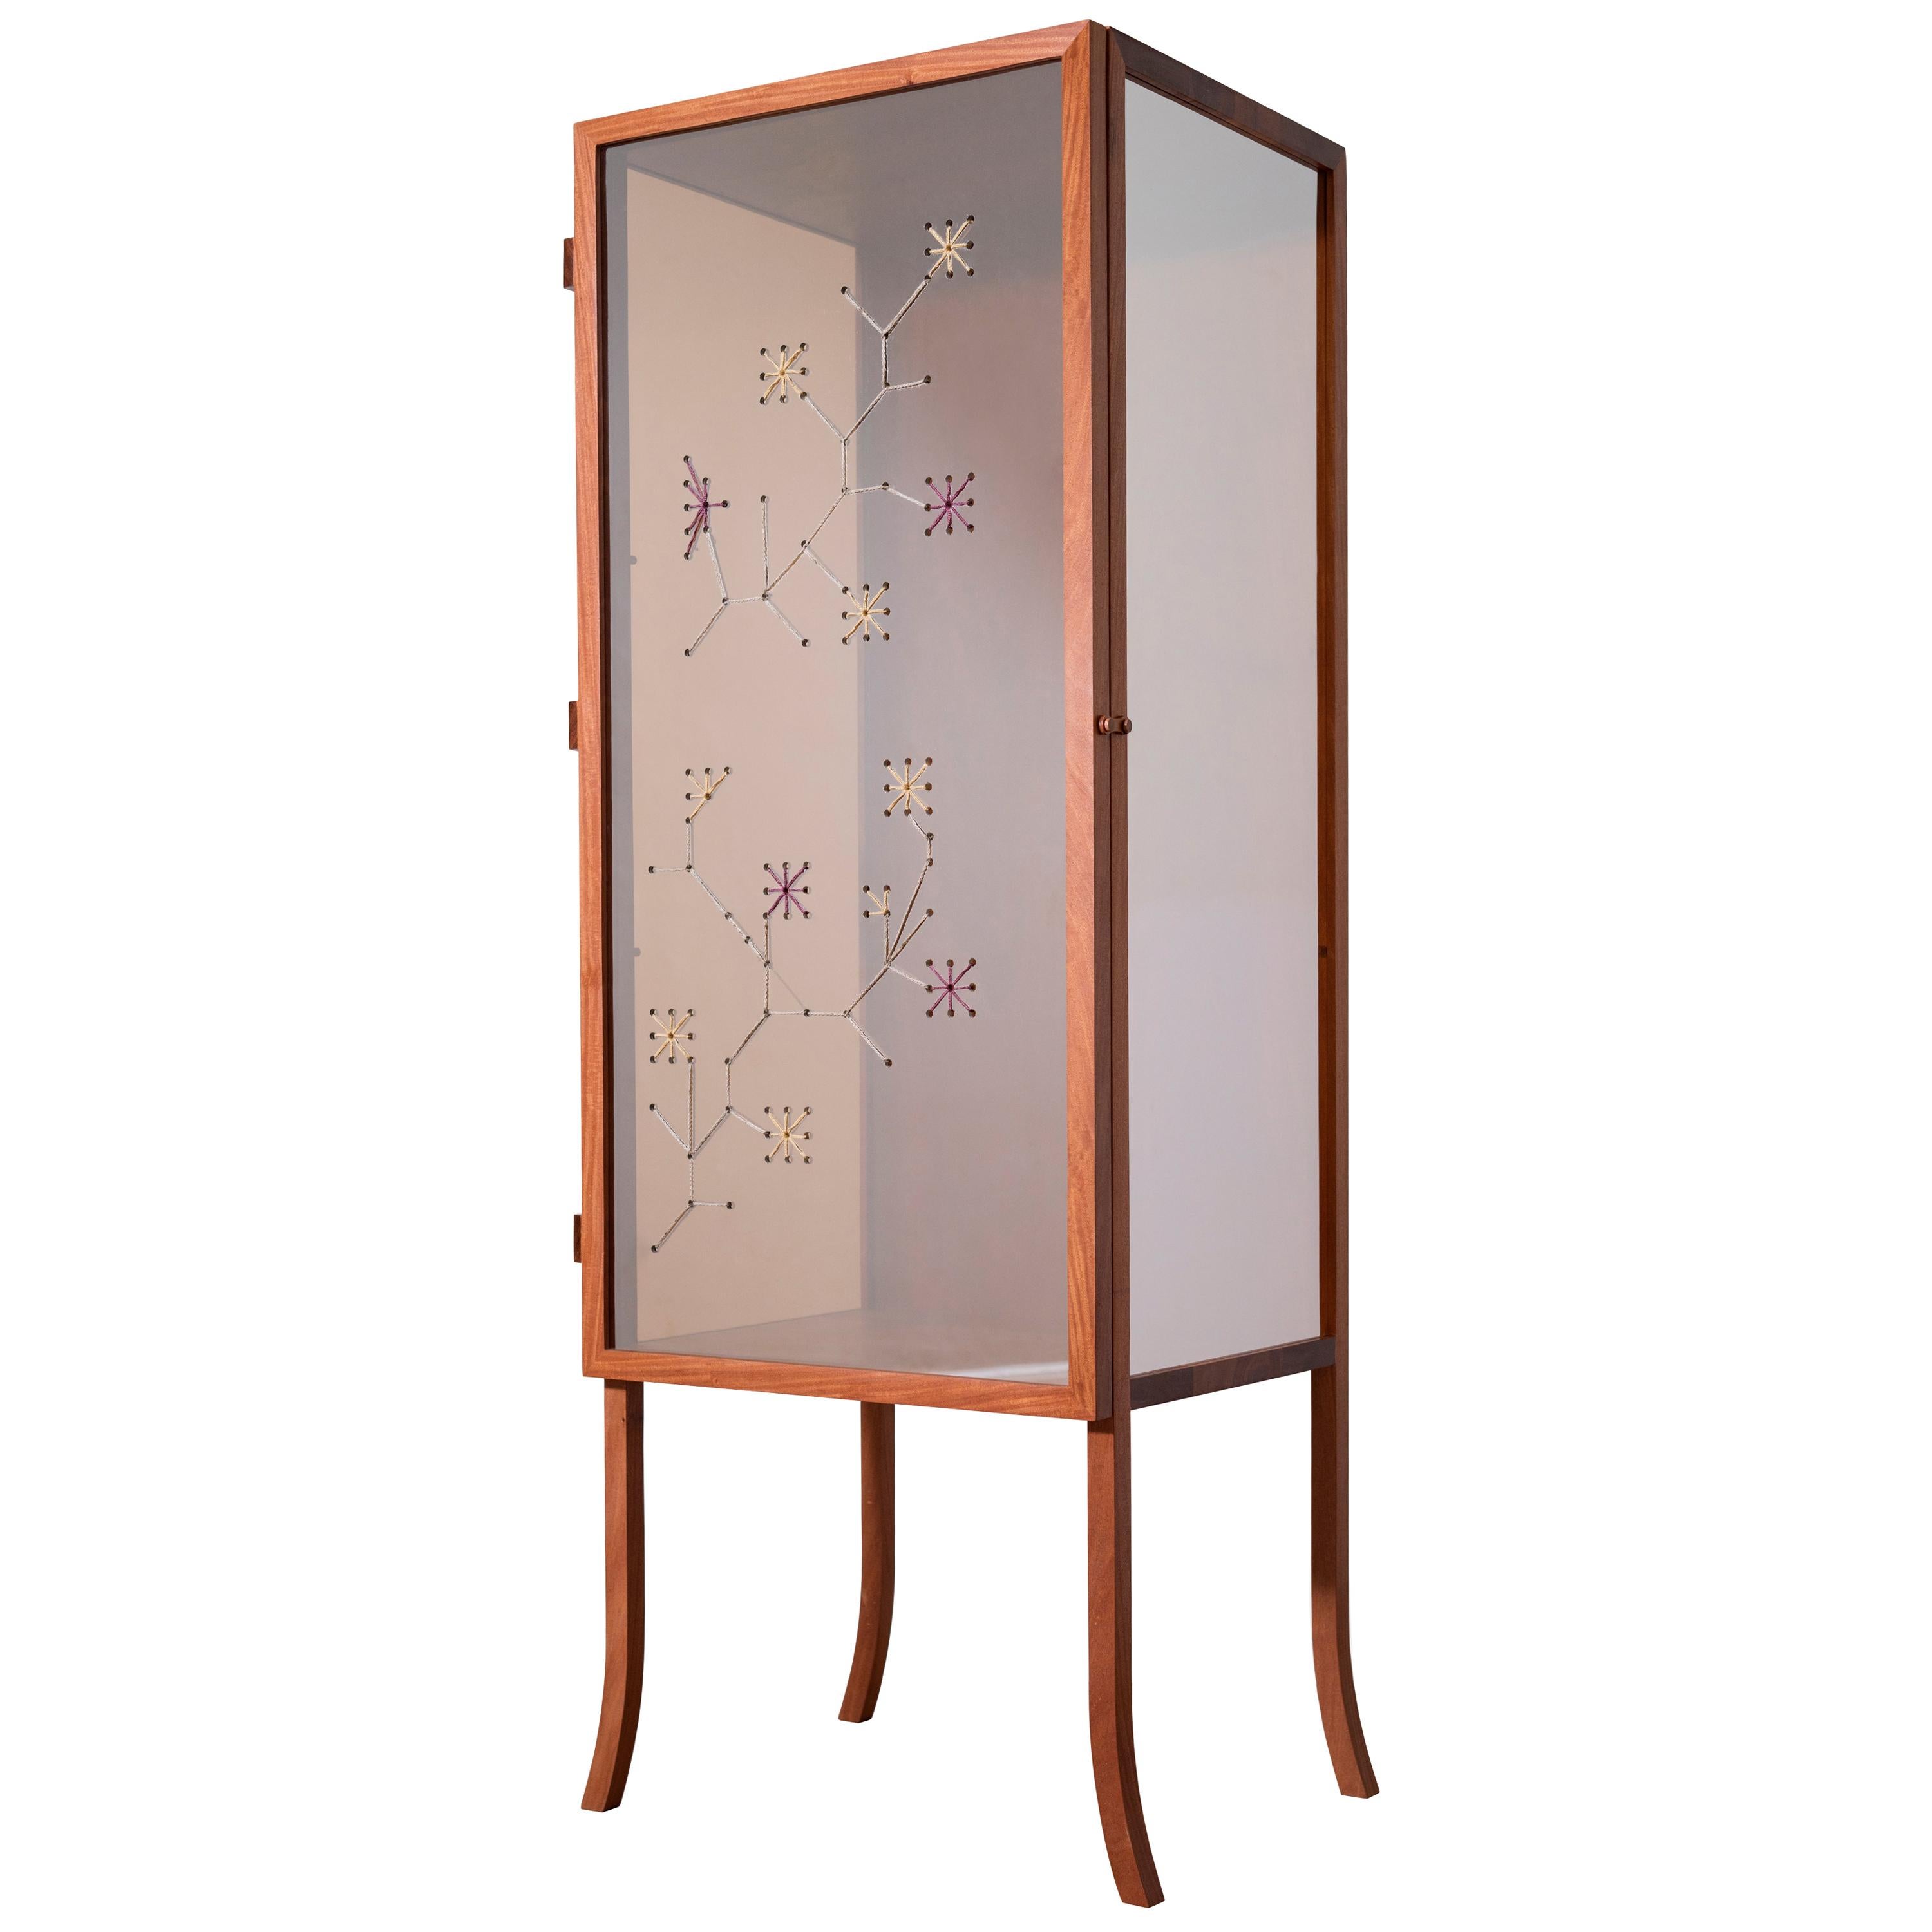 Brocado Cabinet: handmade in Brazil with cabreúva wood and embroidered glass